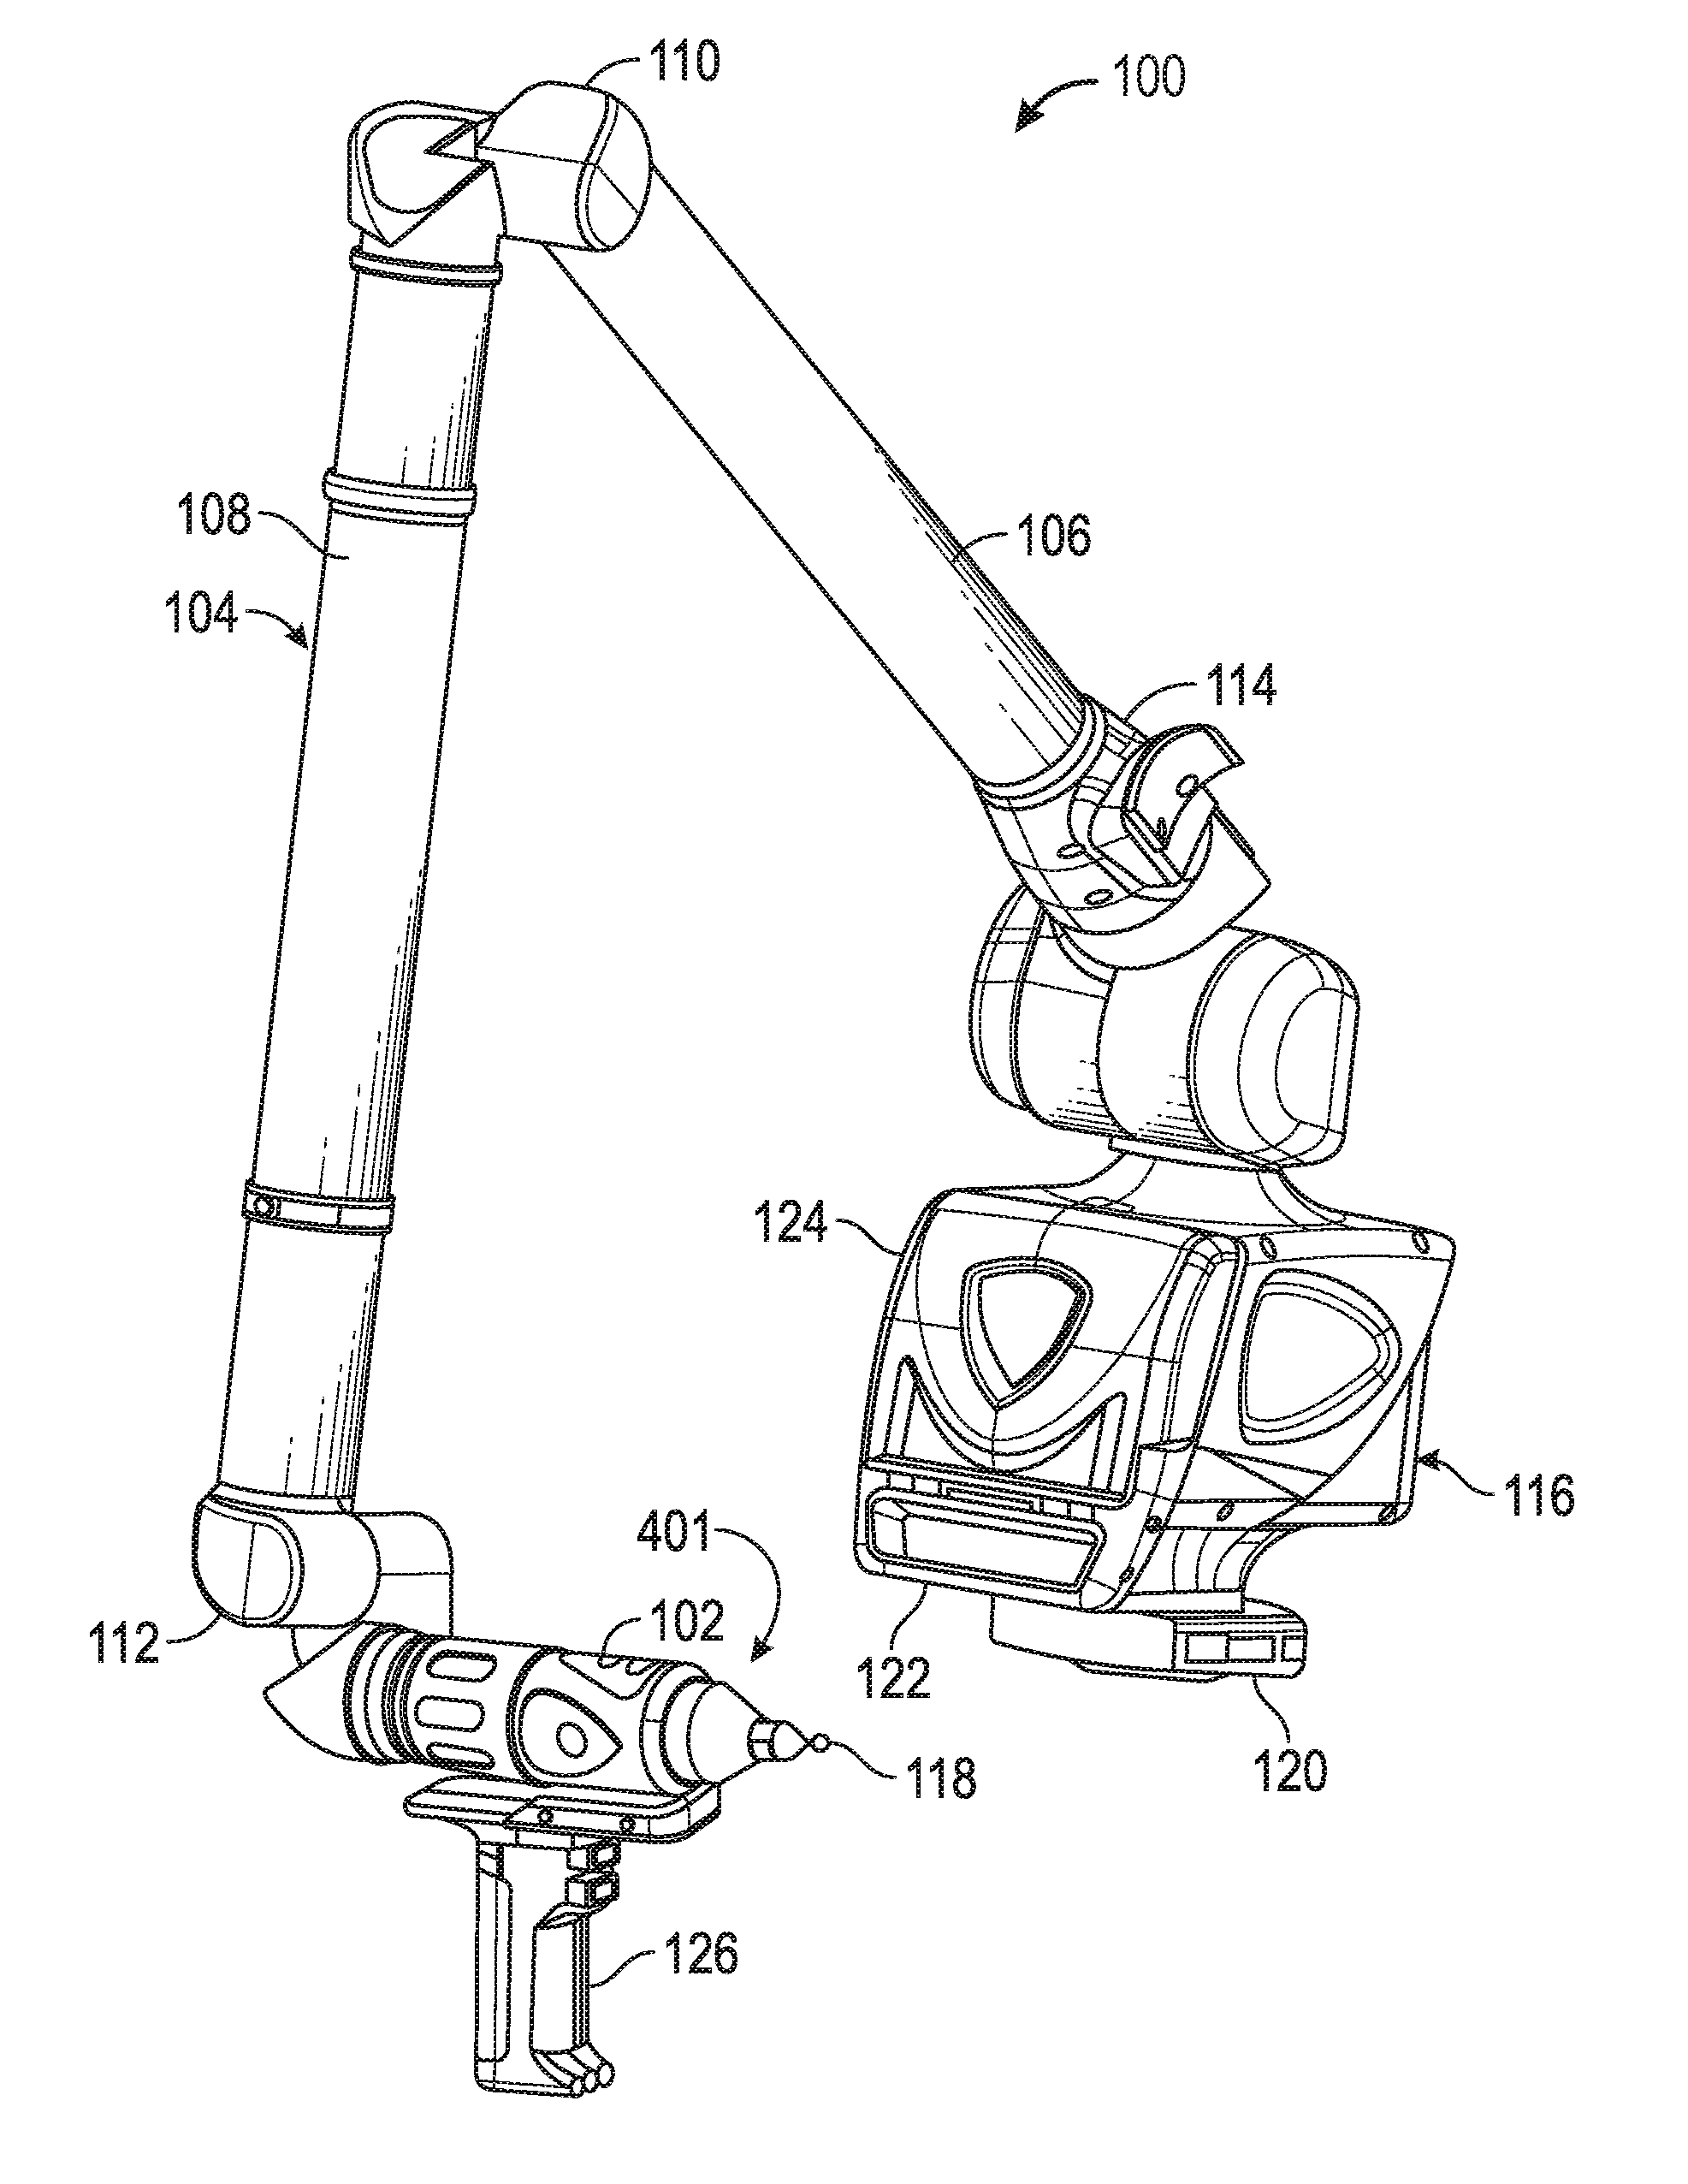 Two-camera triangulation scanner with detachable coupling mechanism